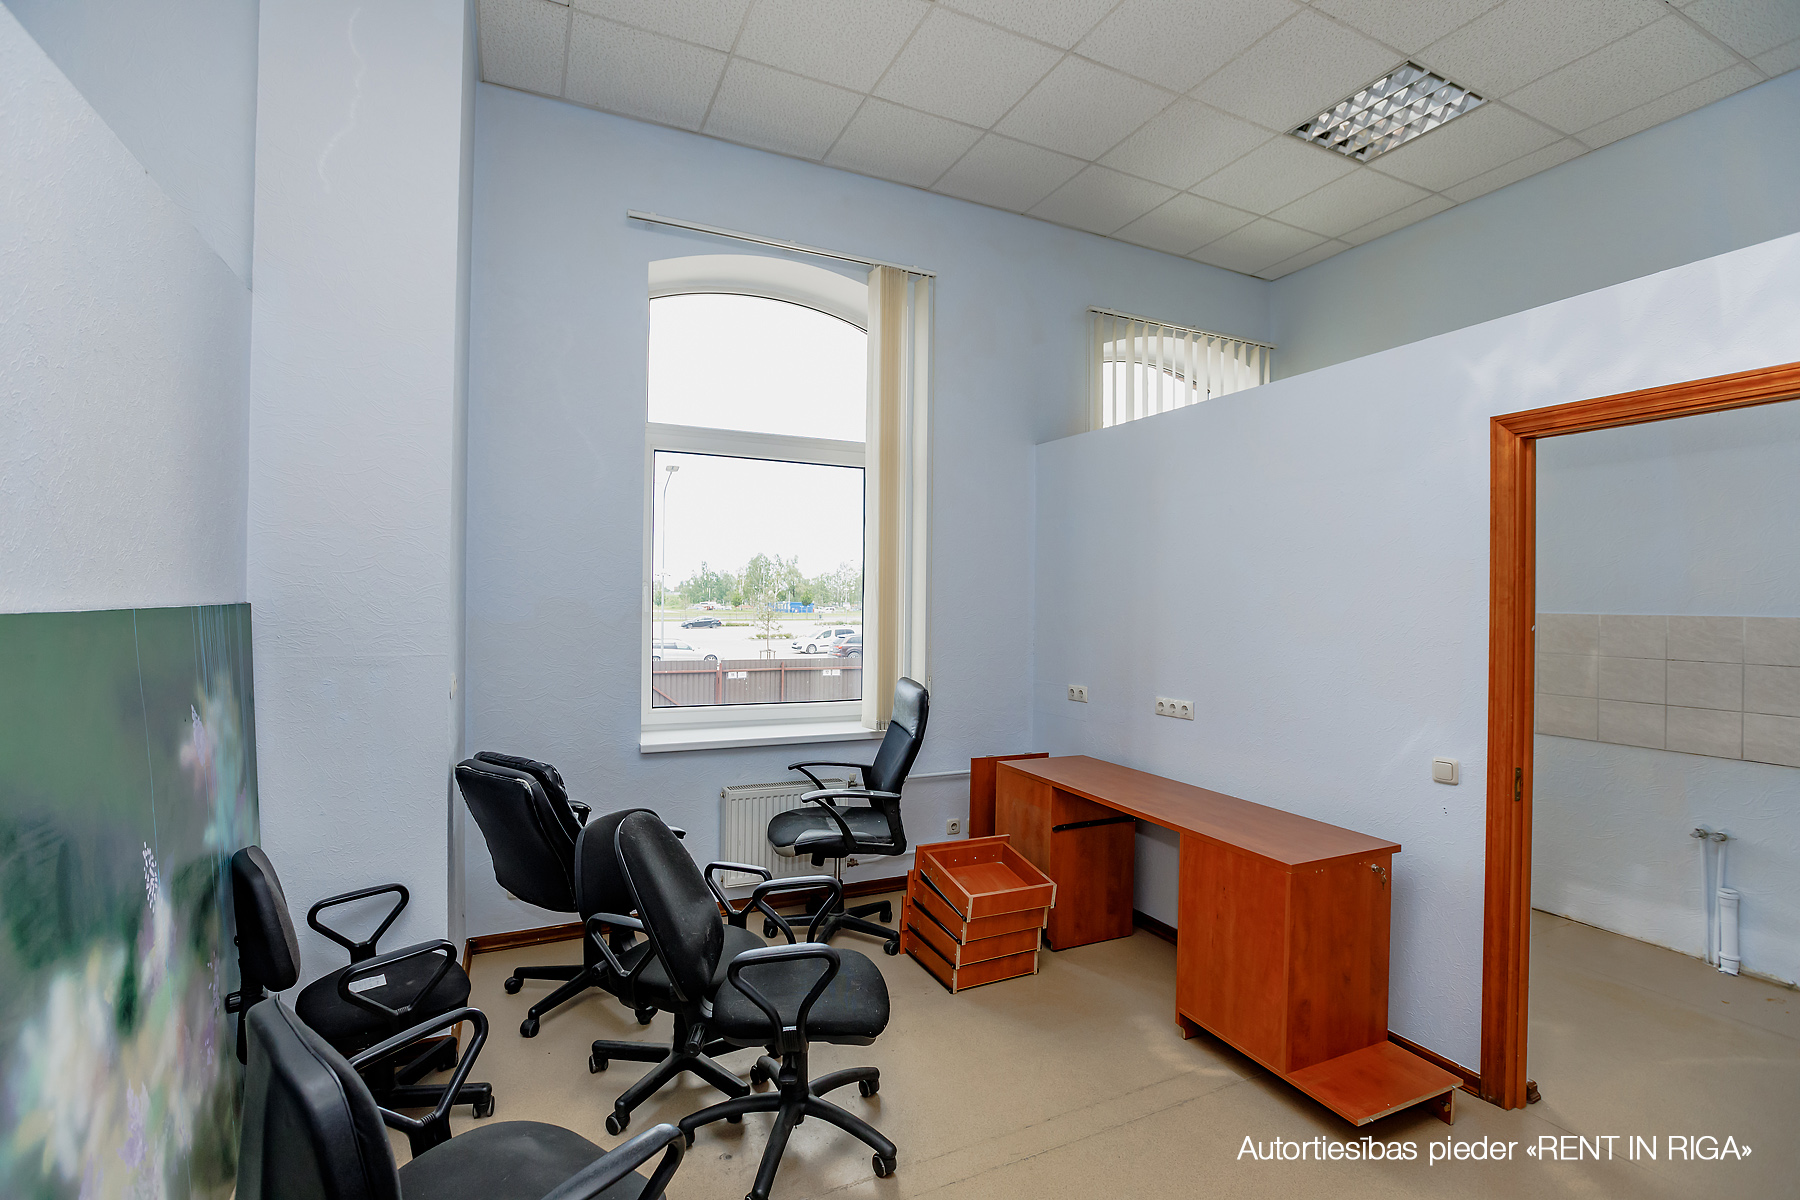 Property building for sale, Hanzas street - Image 1